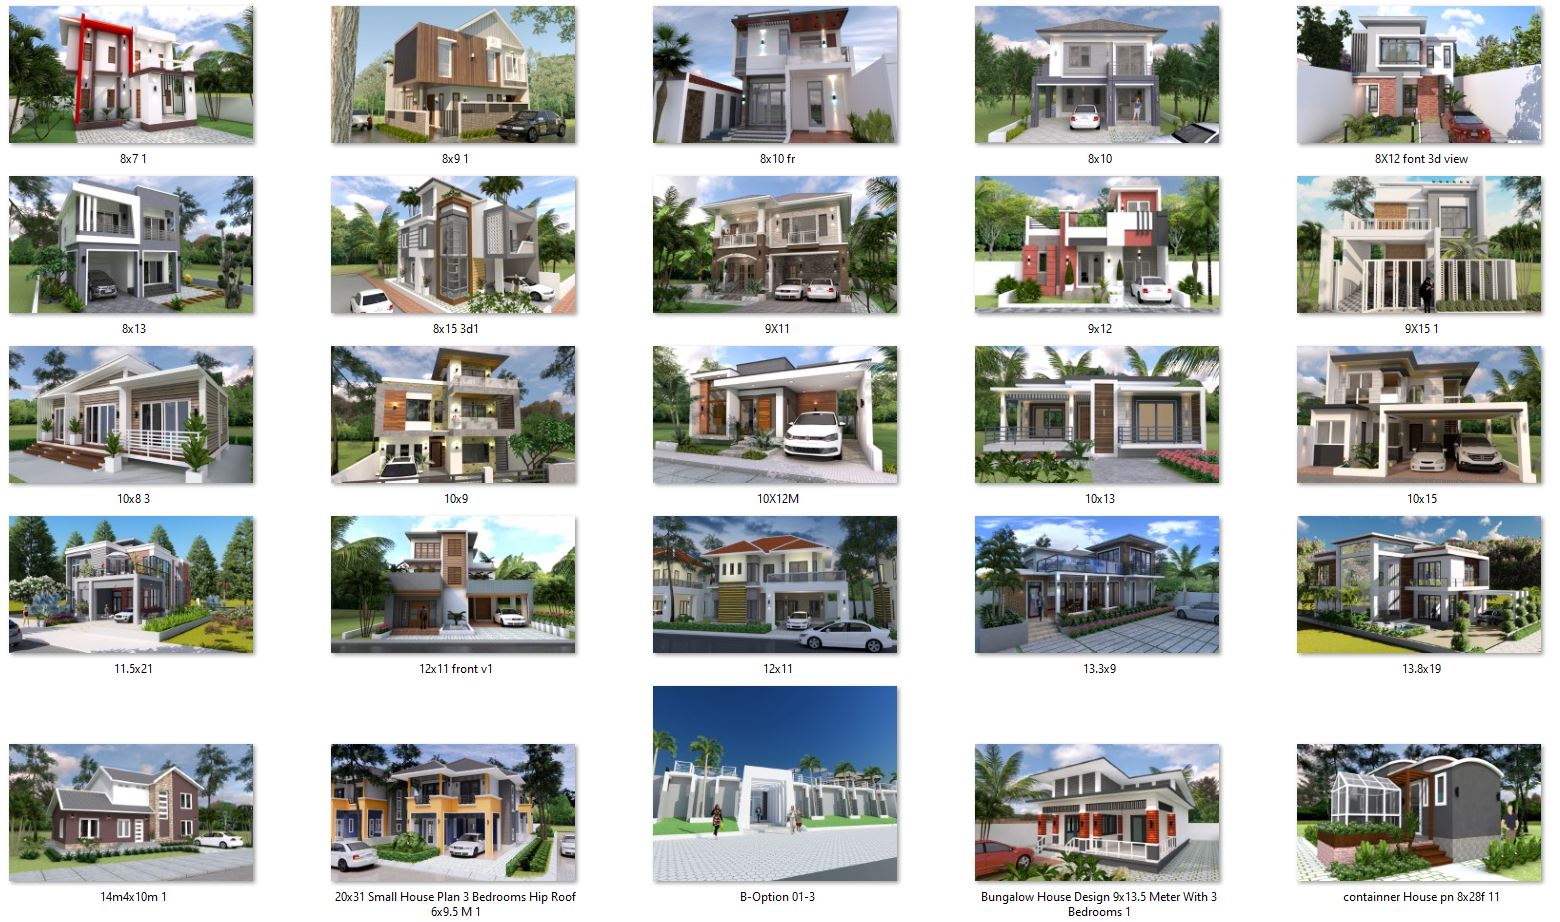 127 House Design Plans Now Available for Sell